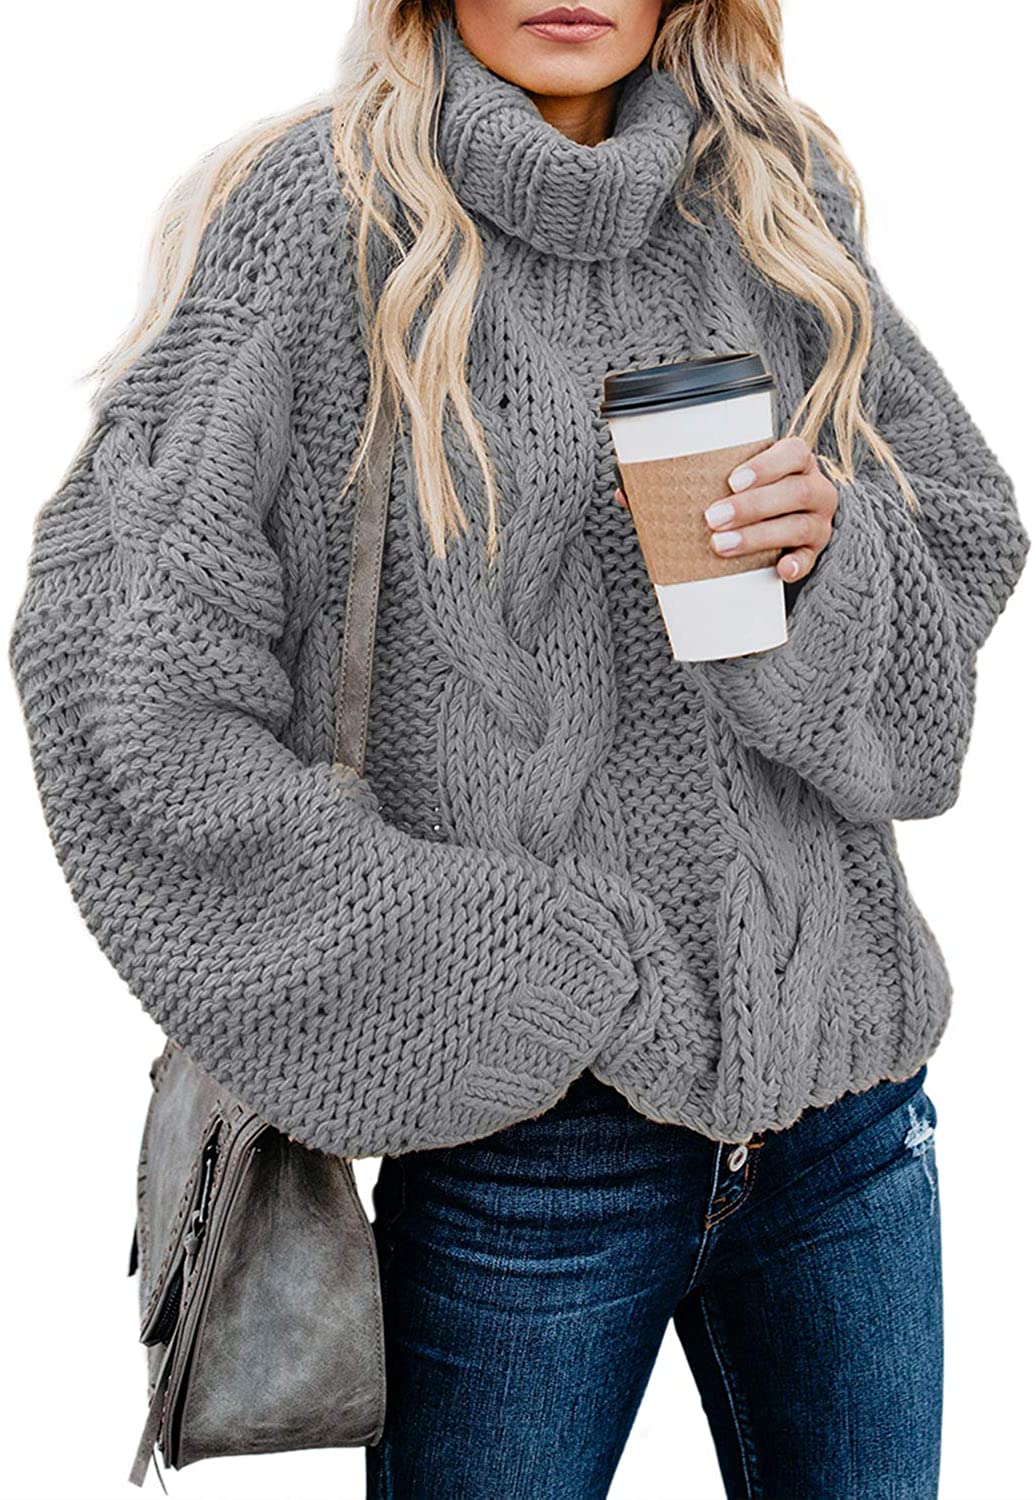 ZKESS Womens Casual Long Sleeve Turtleneck Chunky Knit Pullover Sweater Jumper Tops 